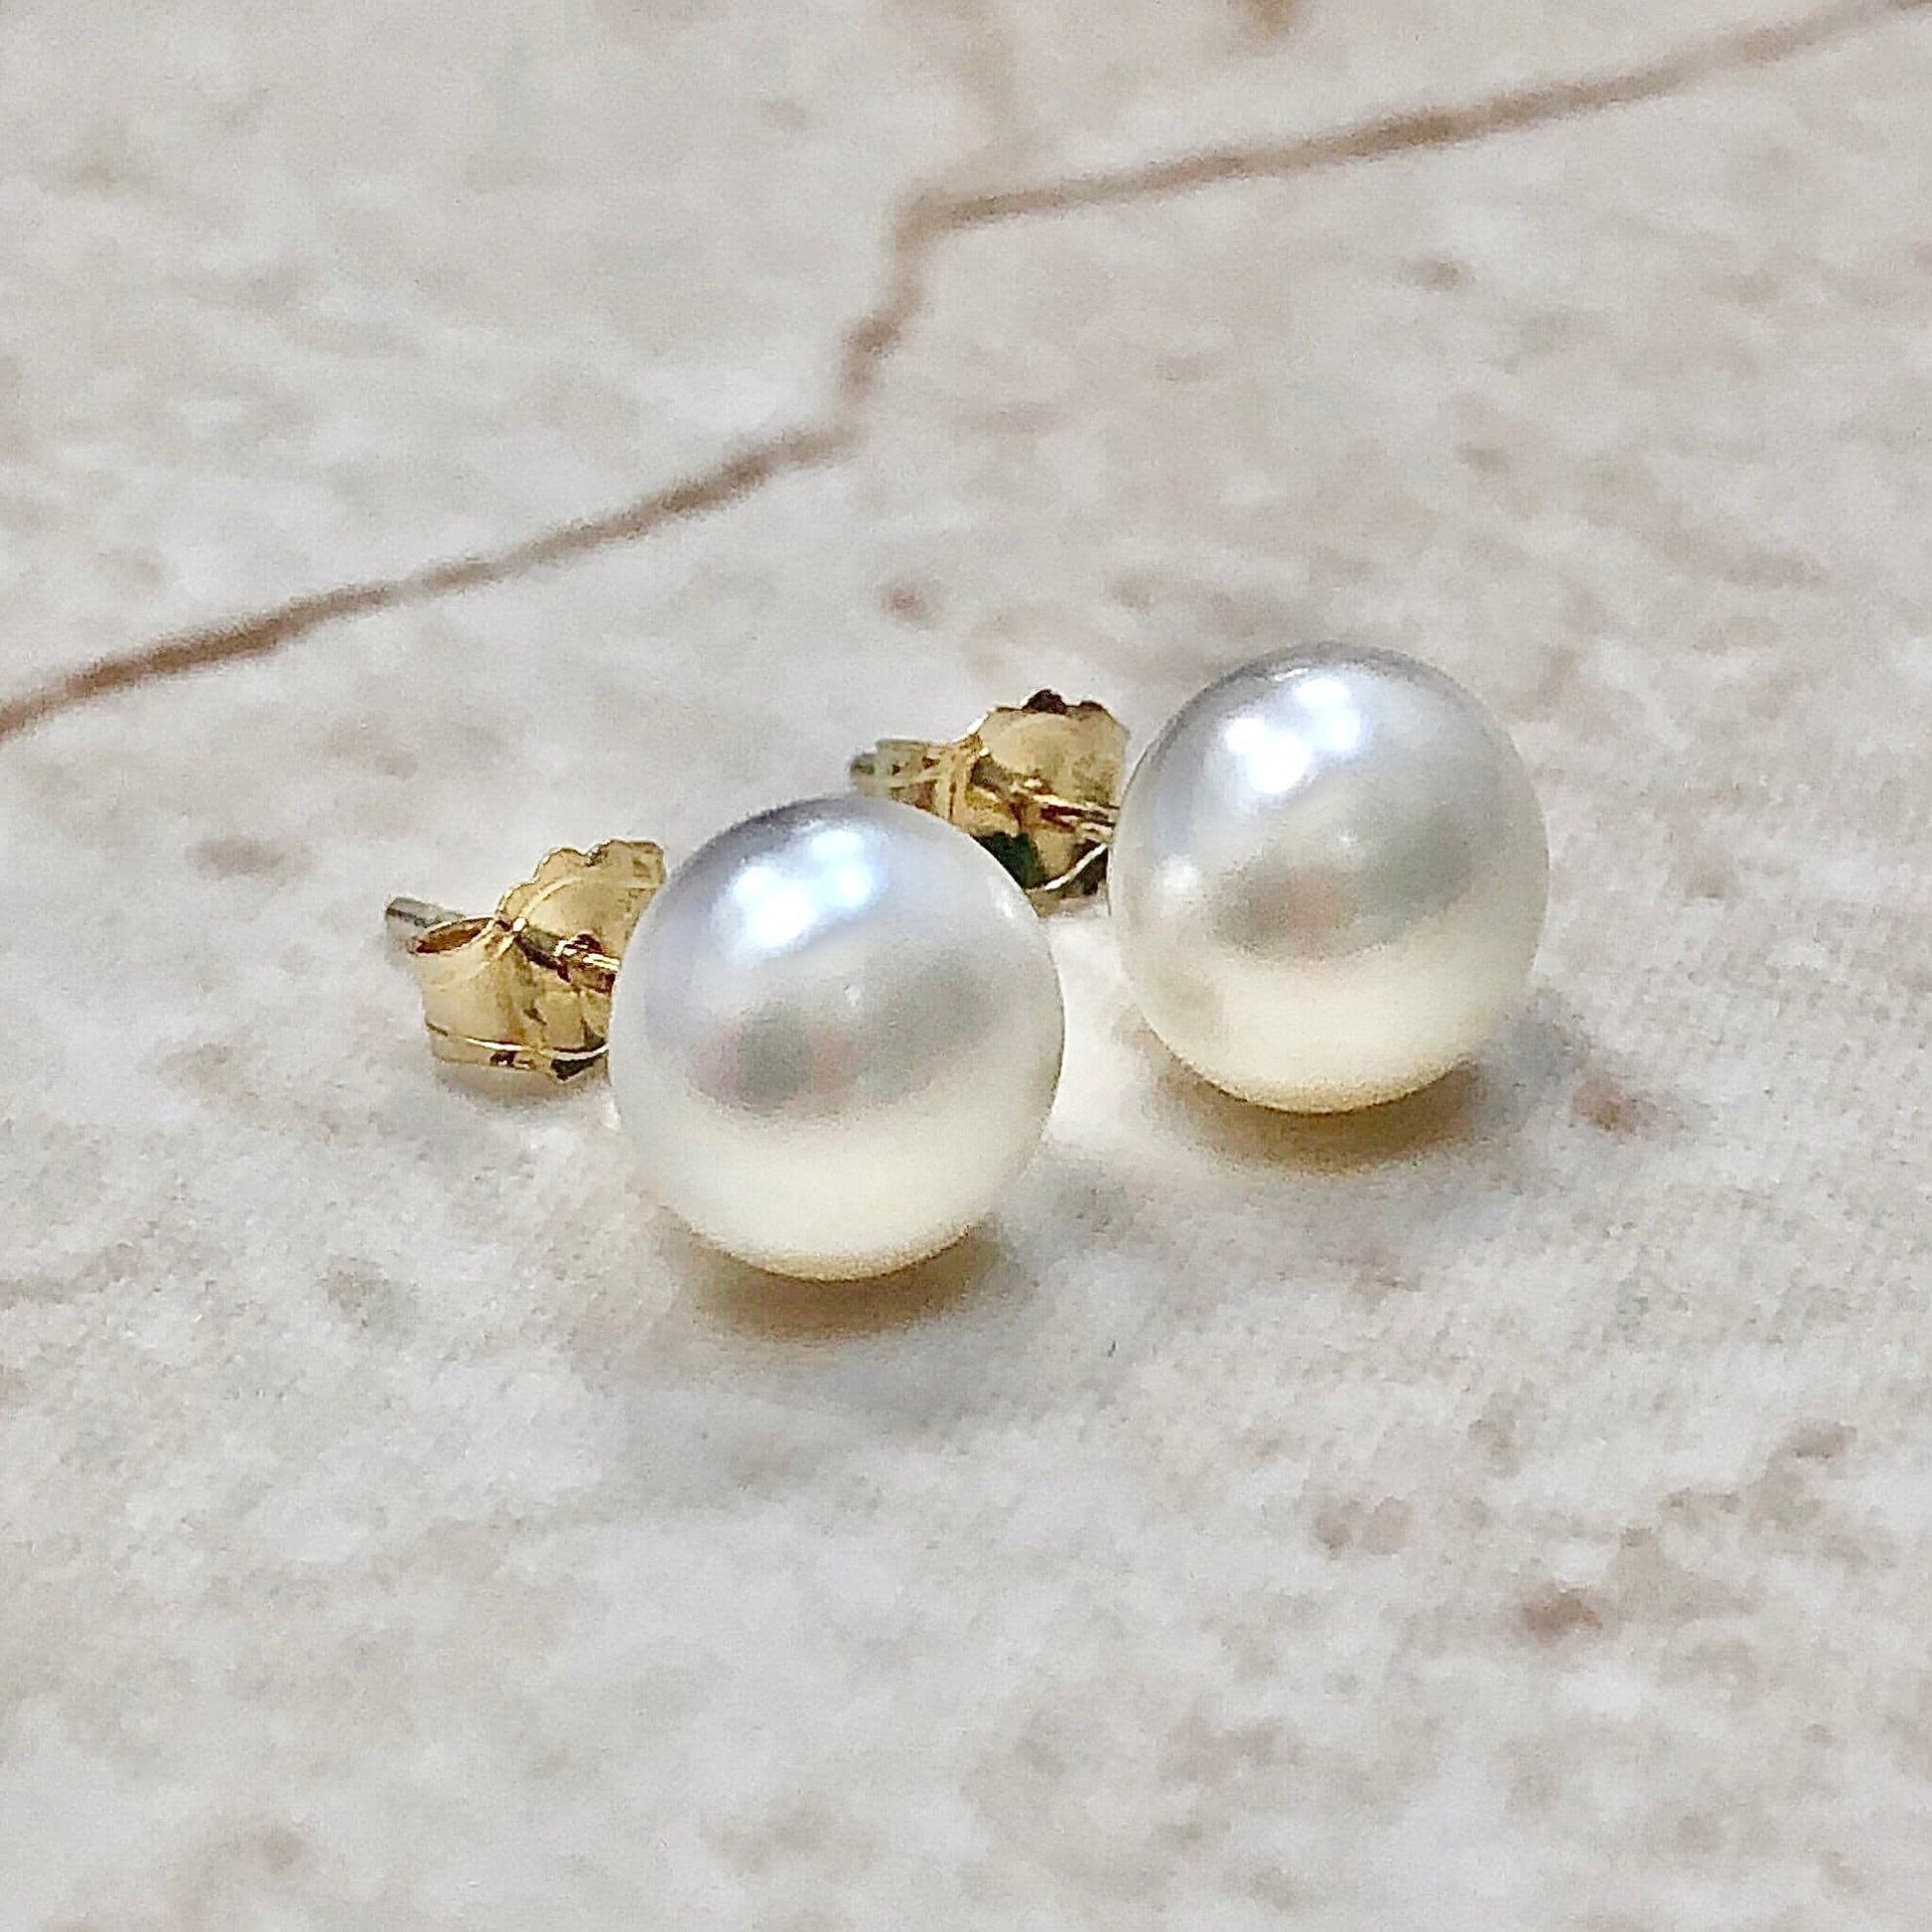 14K White Pearl Stud Earrings - Yellow Gold - Genuine Freshwater Button Pearls - June Birthstone - Best Birthday Gift For Her